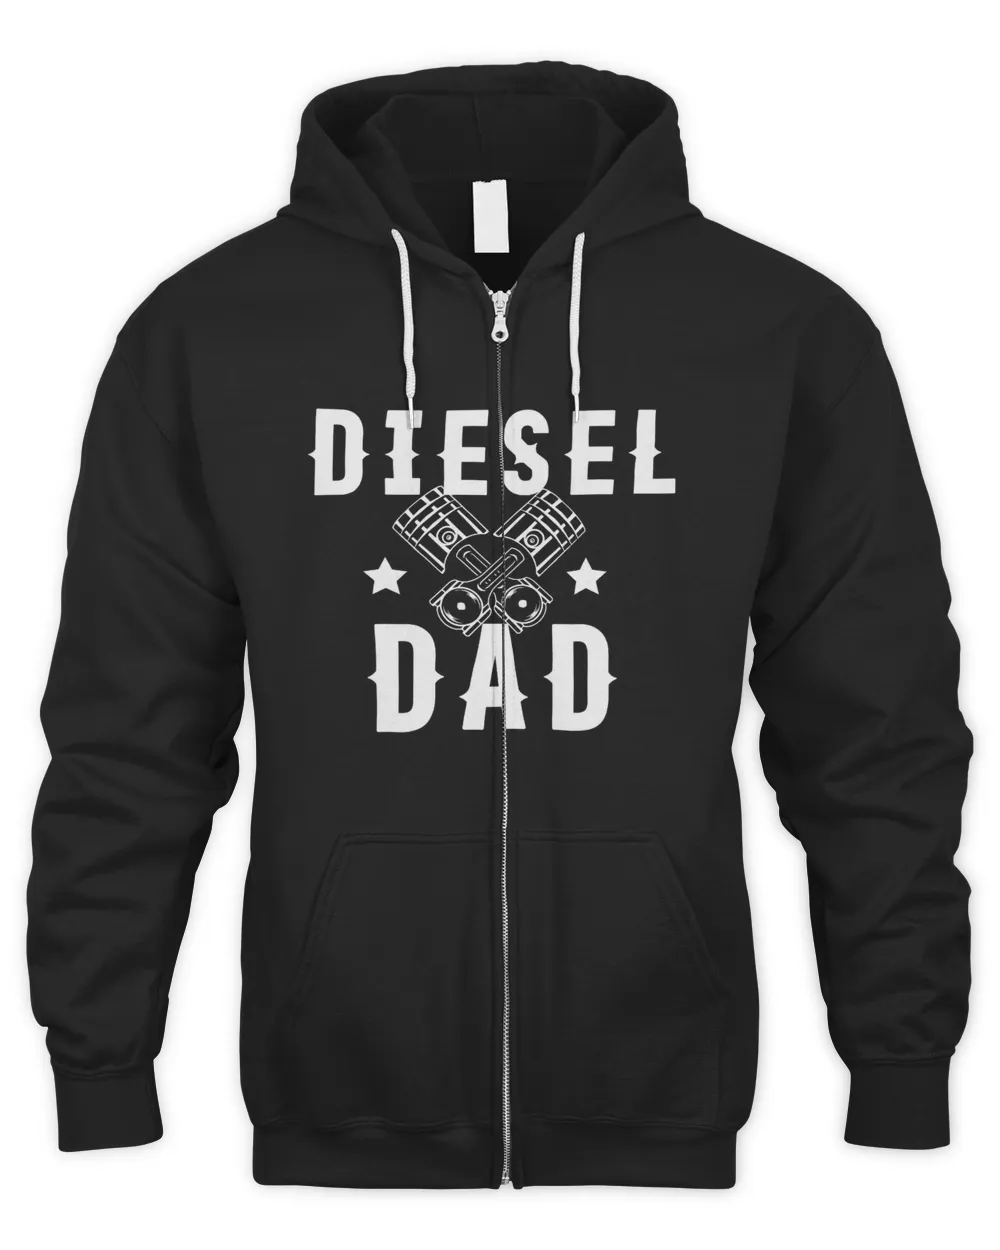 Diesel Dad Fathers Day T shirts